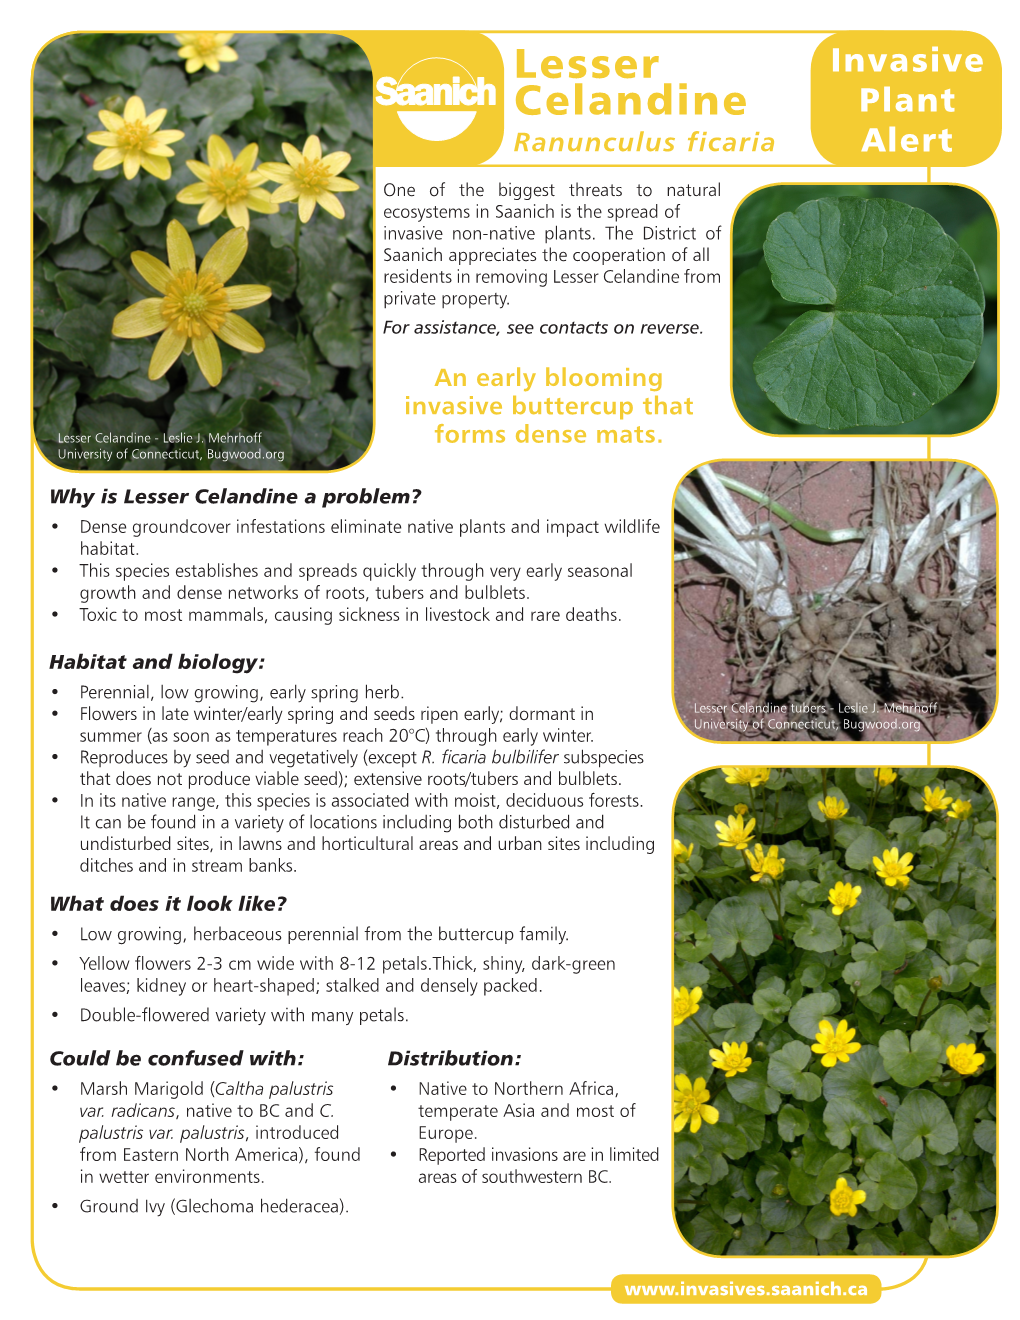 Lesser Celandine from Private Property